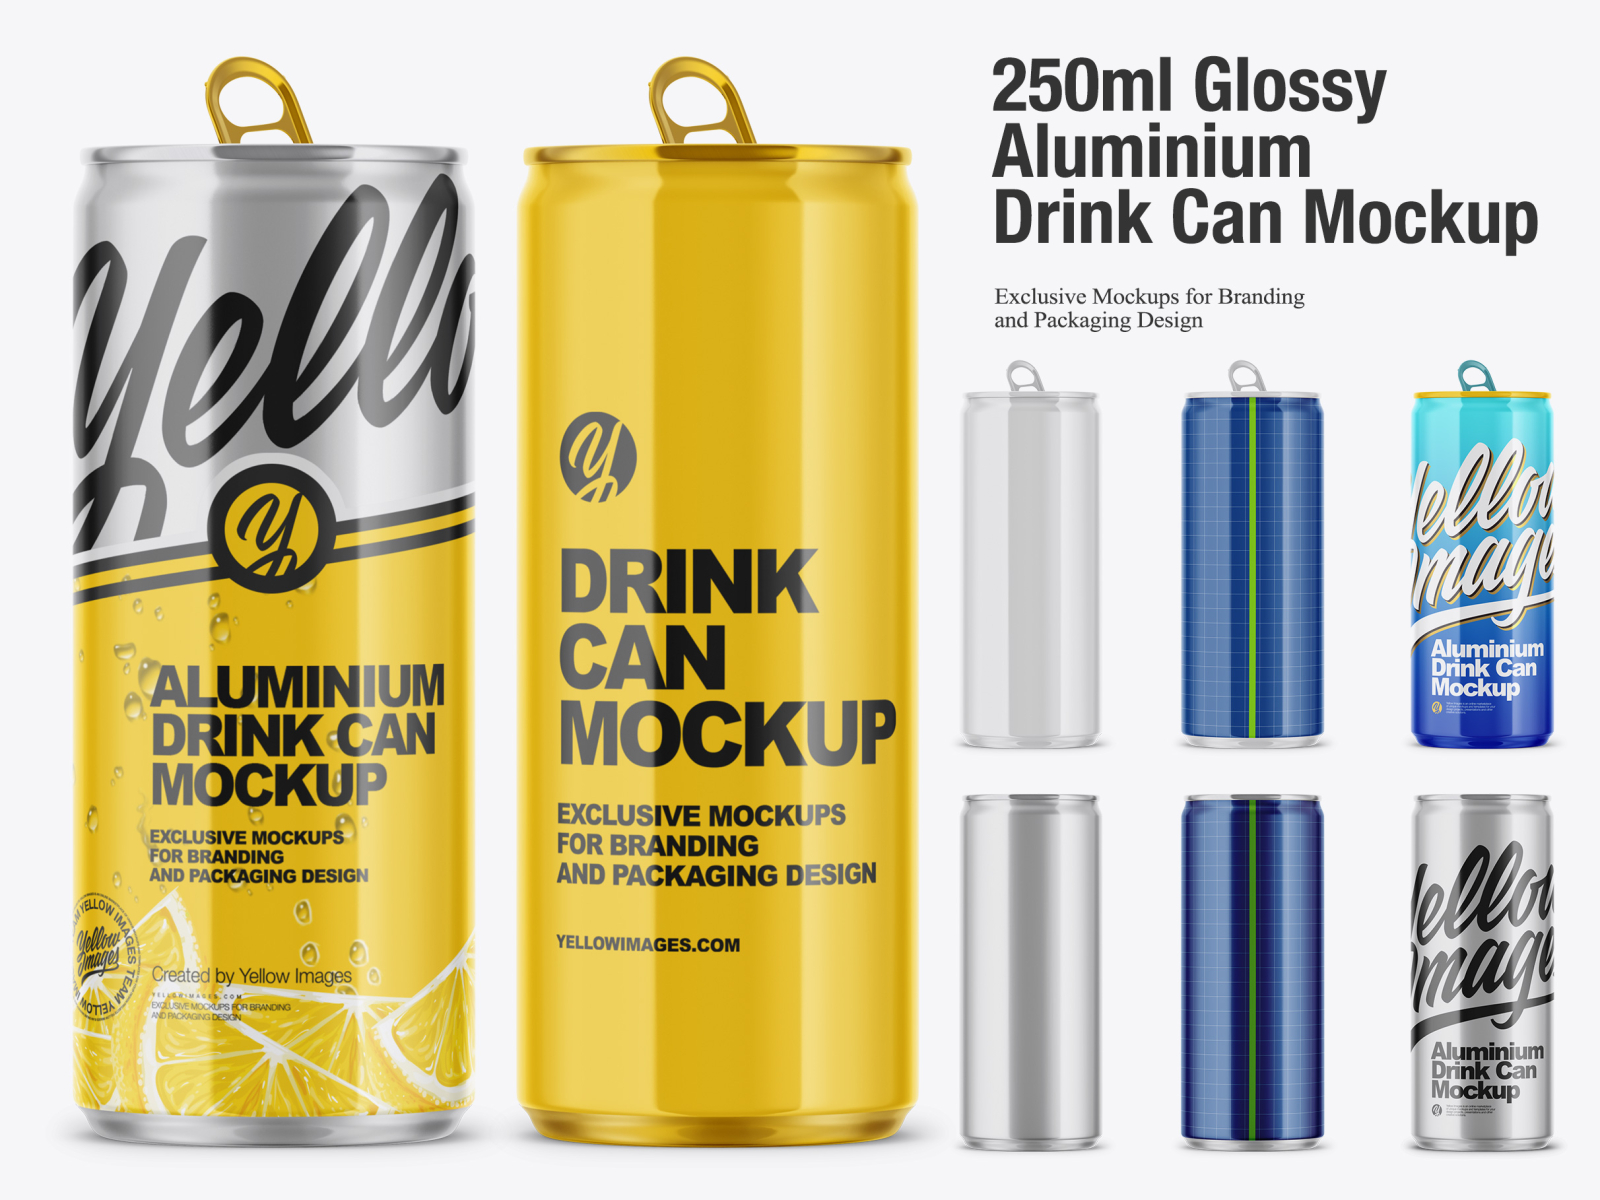 Download 250ml Glossy Aluminium Drink Can Mockup By Oleksandr Hlubokyi On Dribbble PSD Mockup Templates